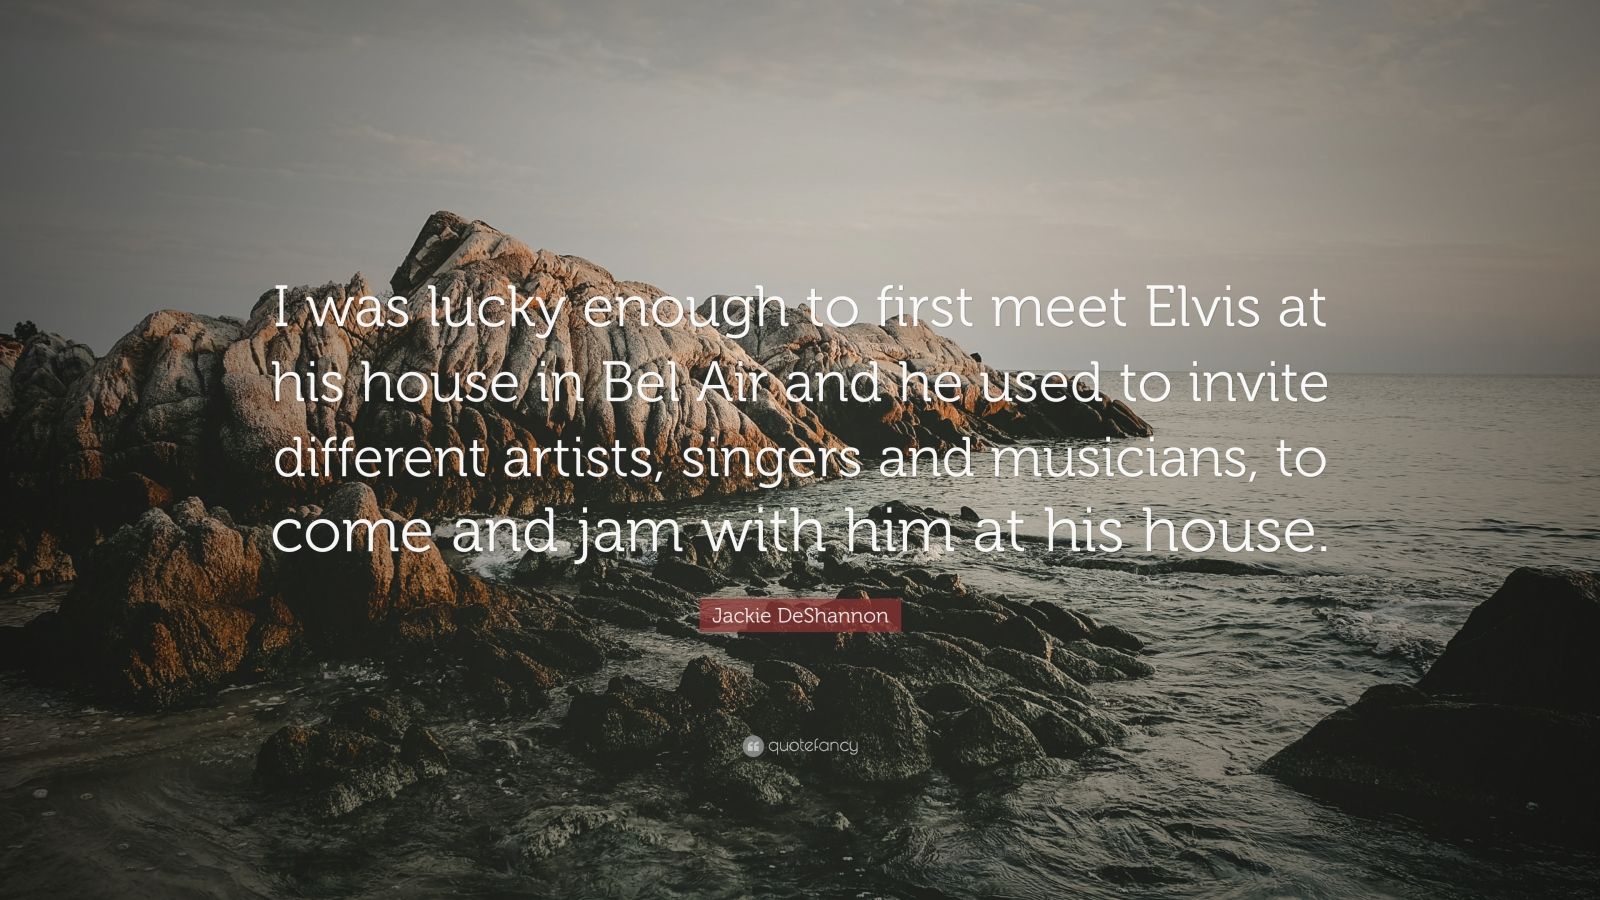 Jackie DeShannon Quote: “I was lucky enough to first meet Elvis at his ...